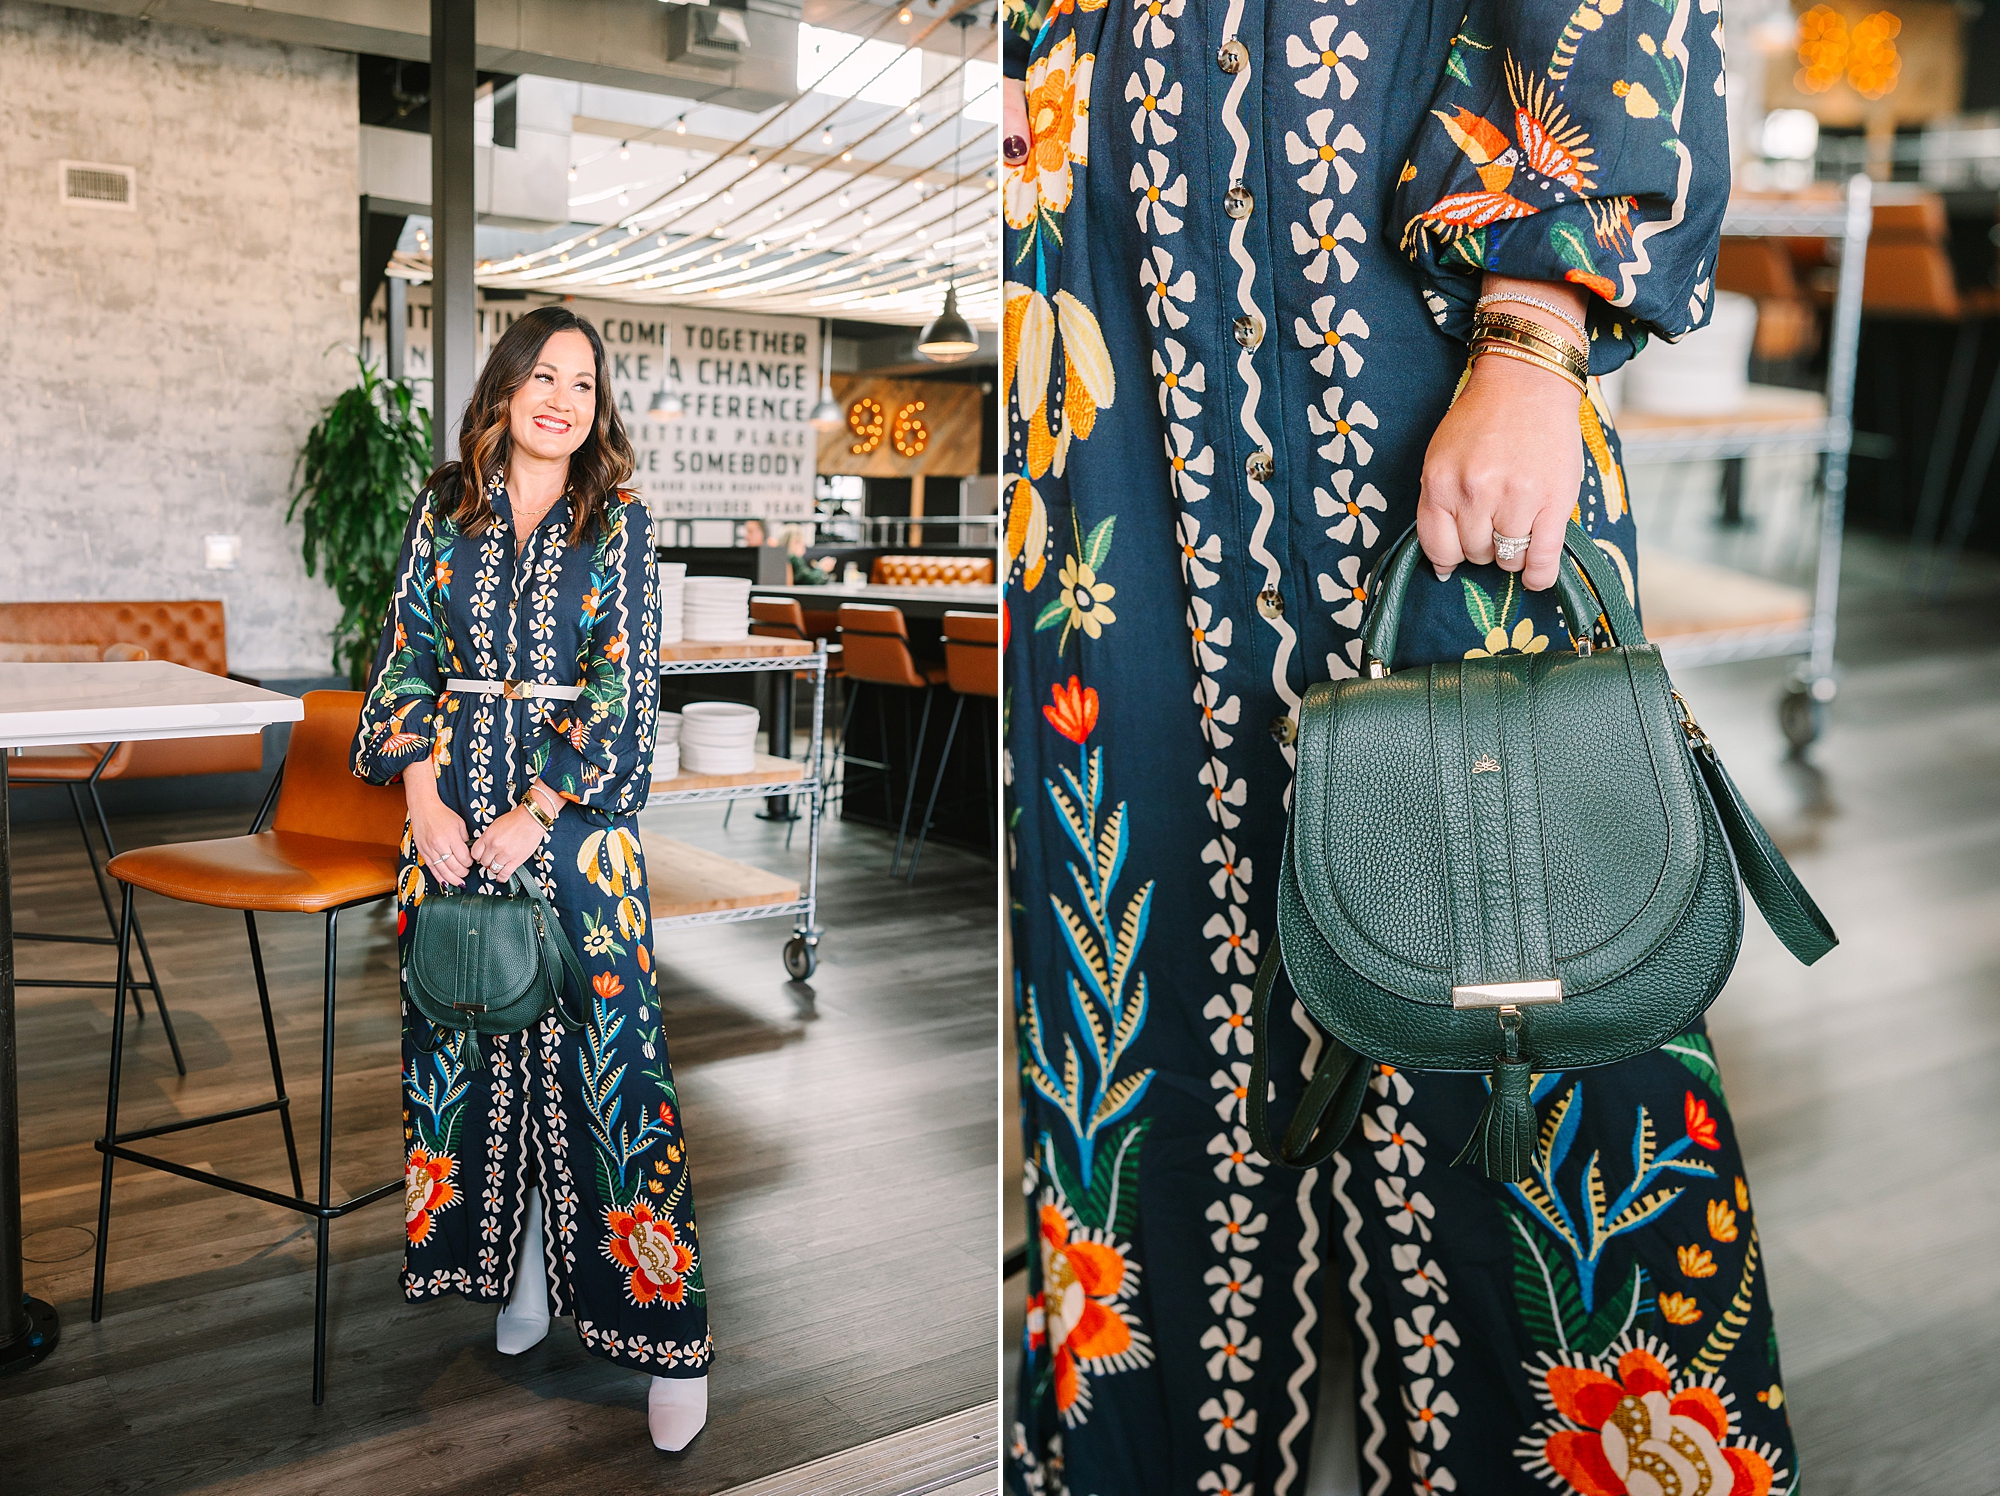 woman stands in coffee shop in printed dress with teal handbag